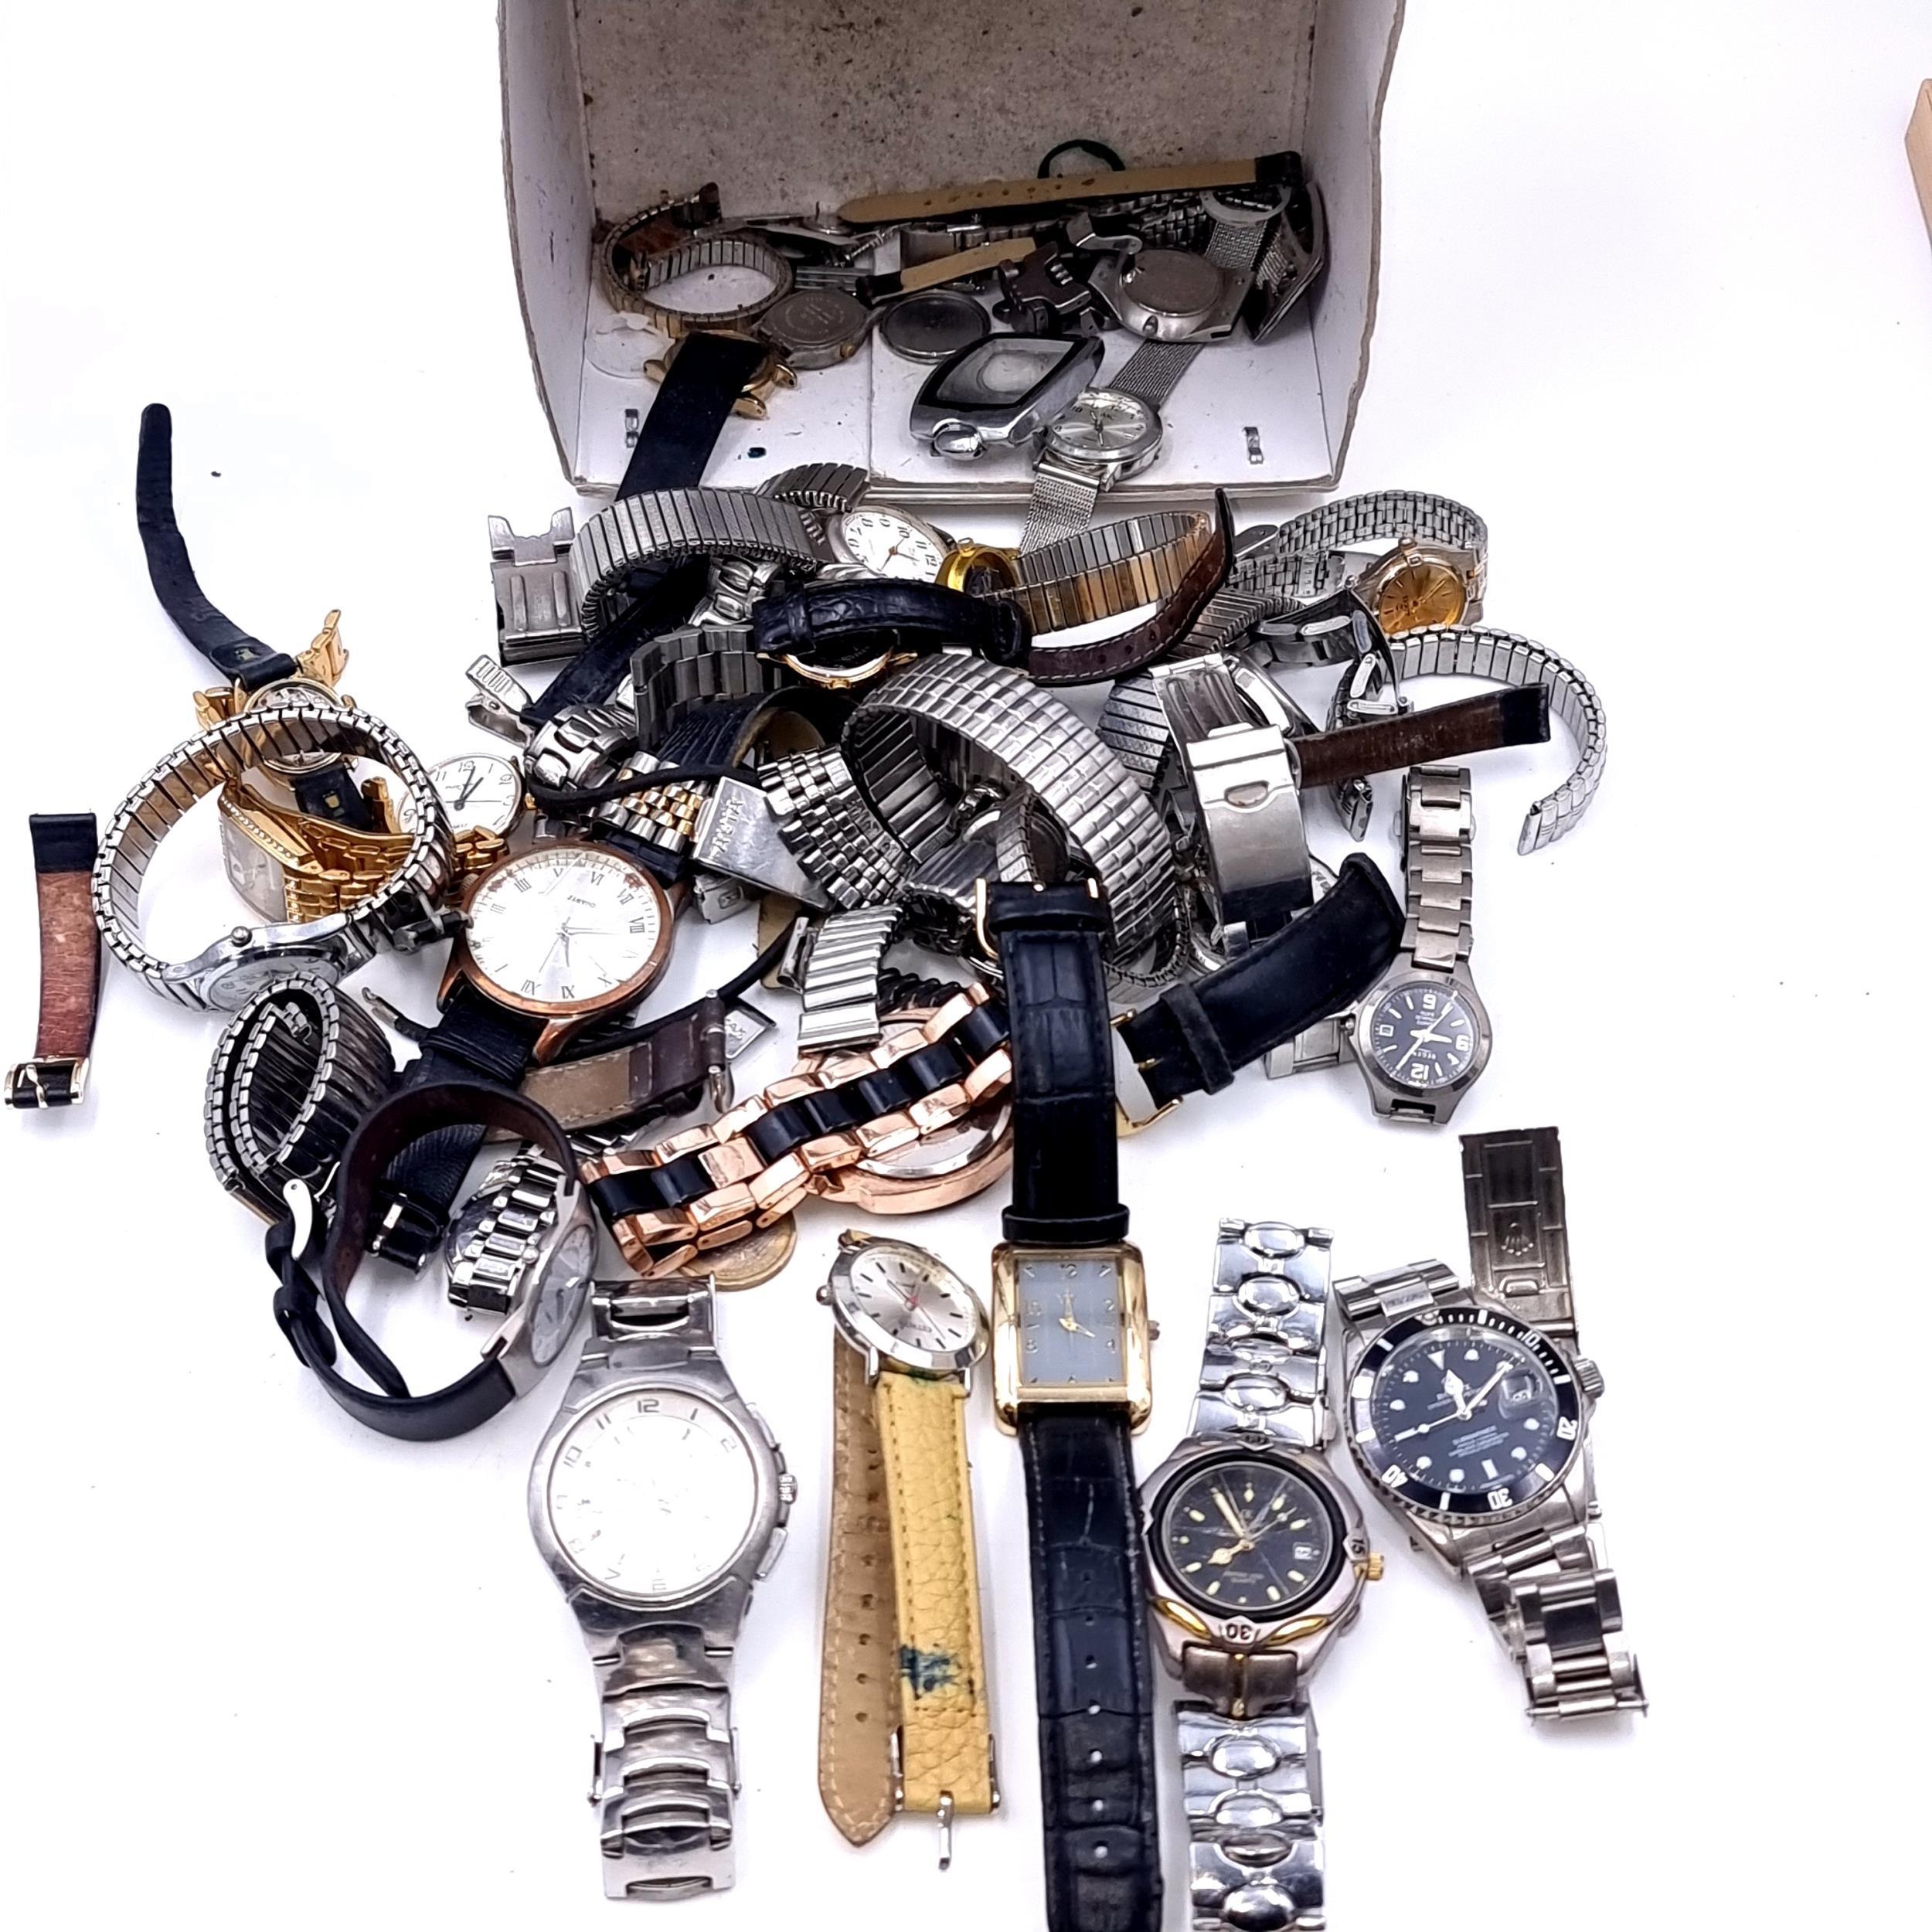 An extremely large collection of watches with some branded examples ...